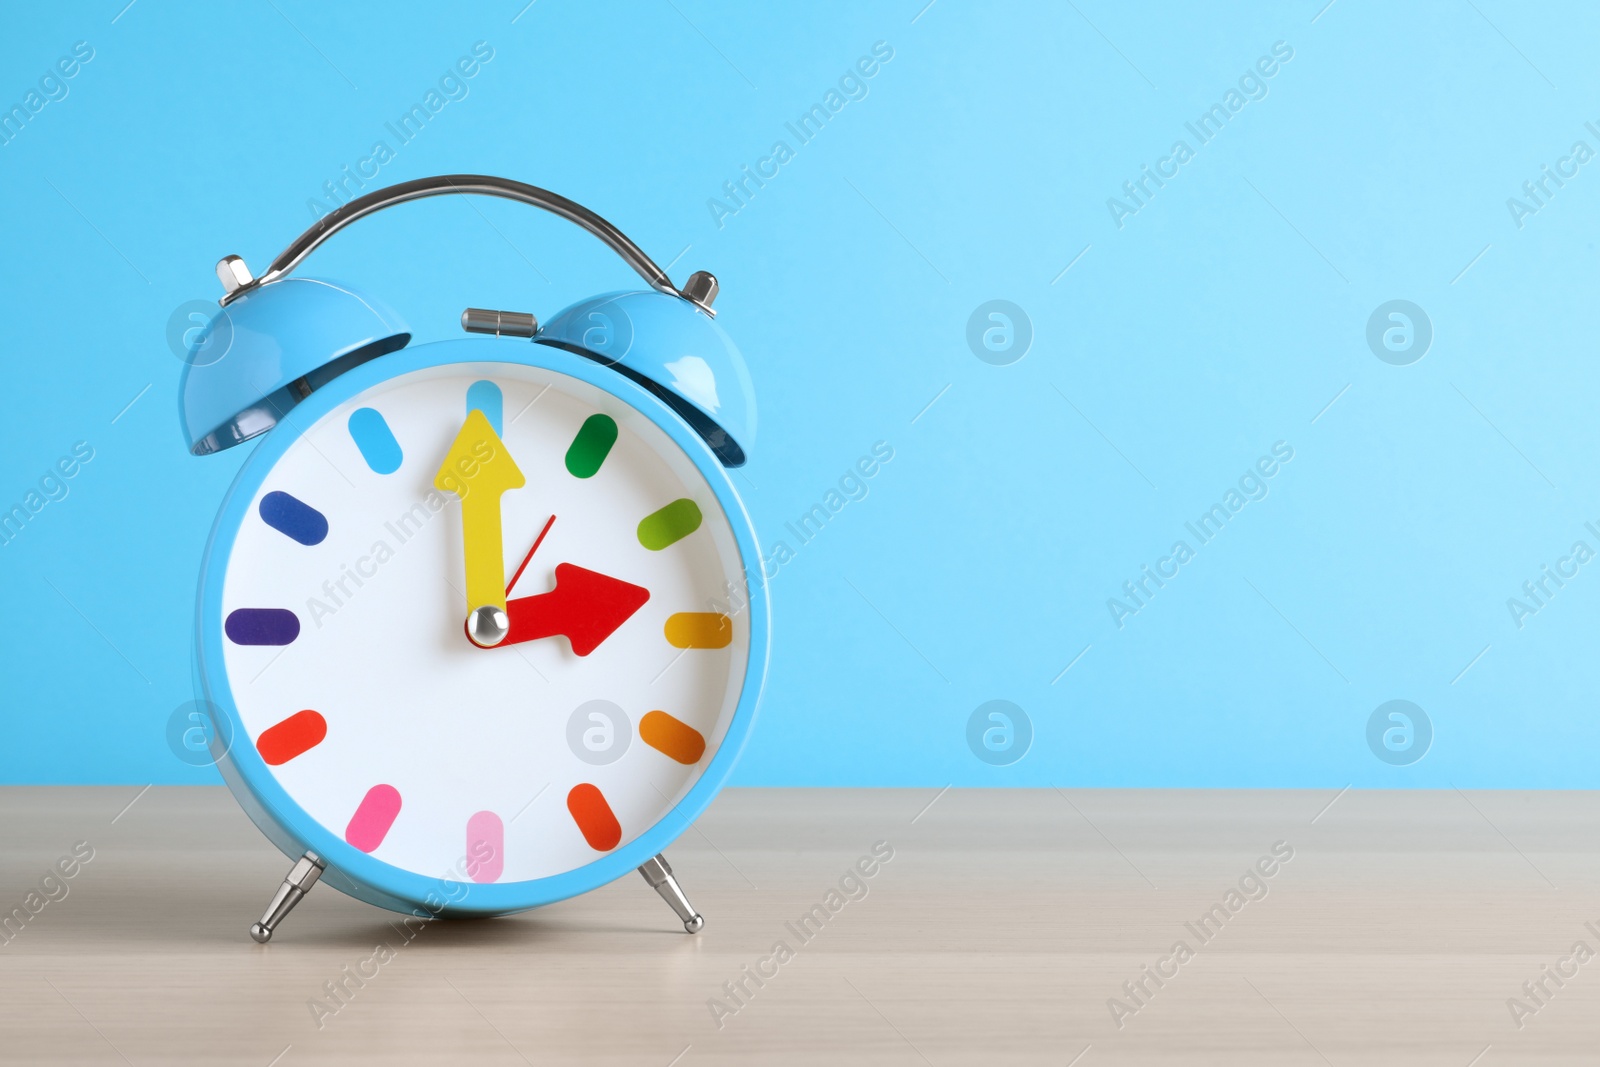 Photo of Alarm clock on white wooden table against light blue background, space for text